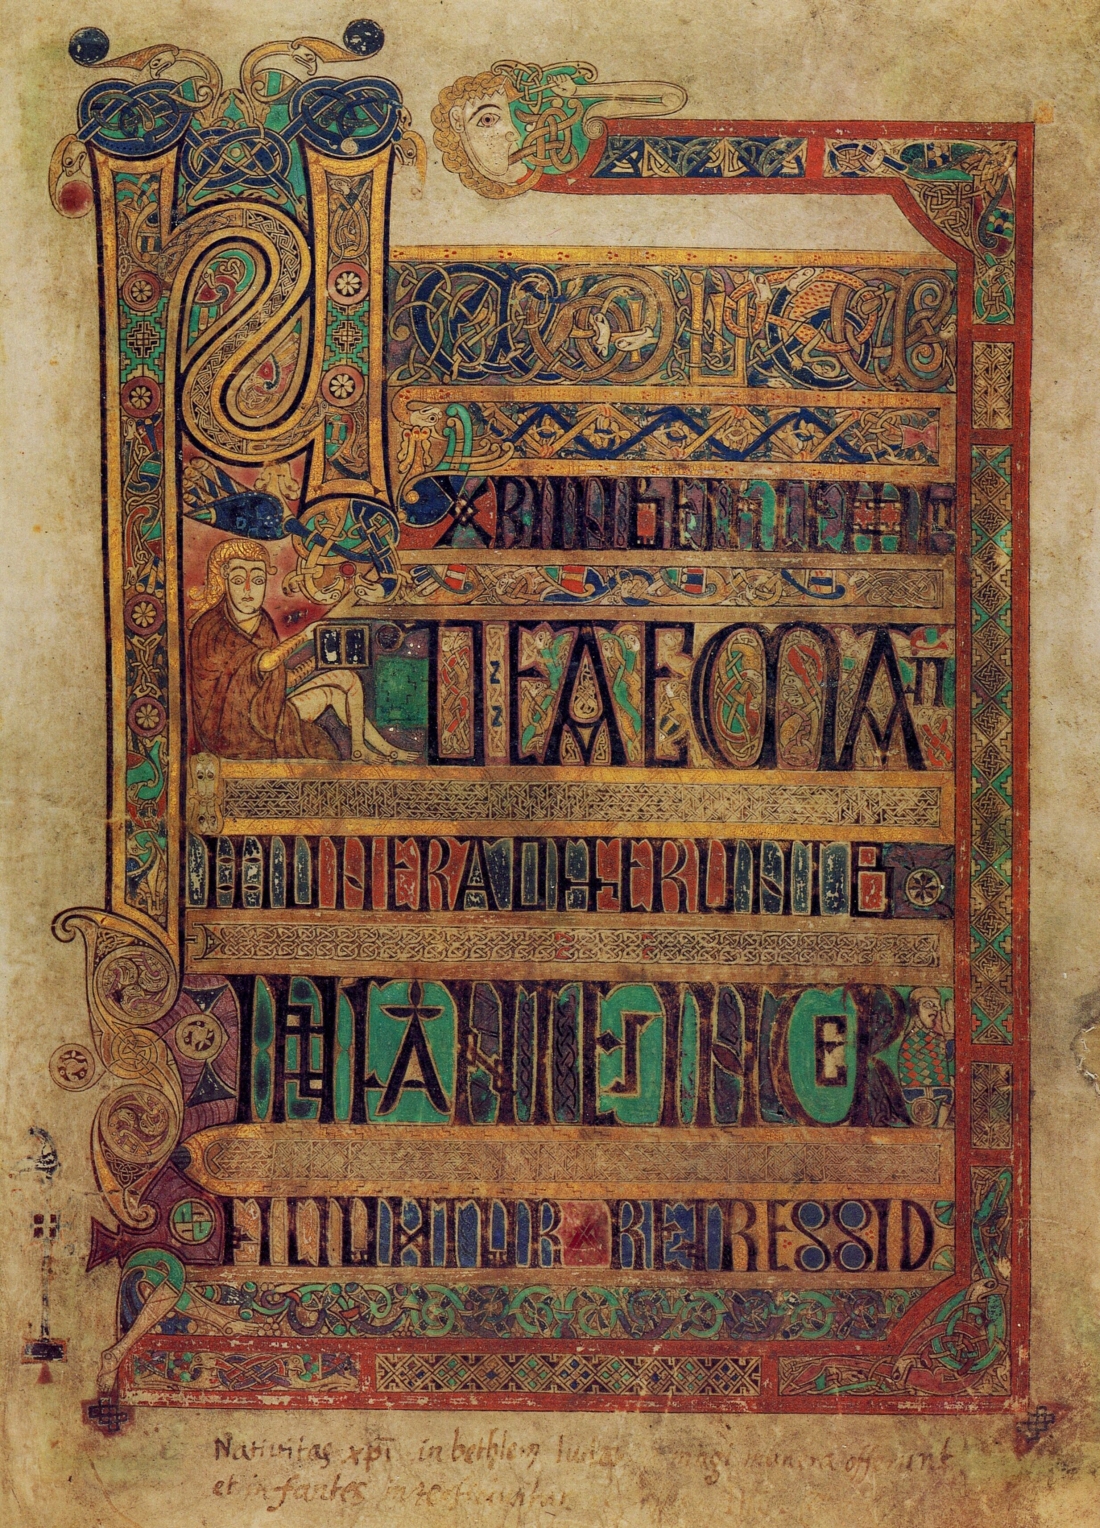 page from the book of Kells